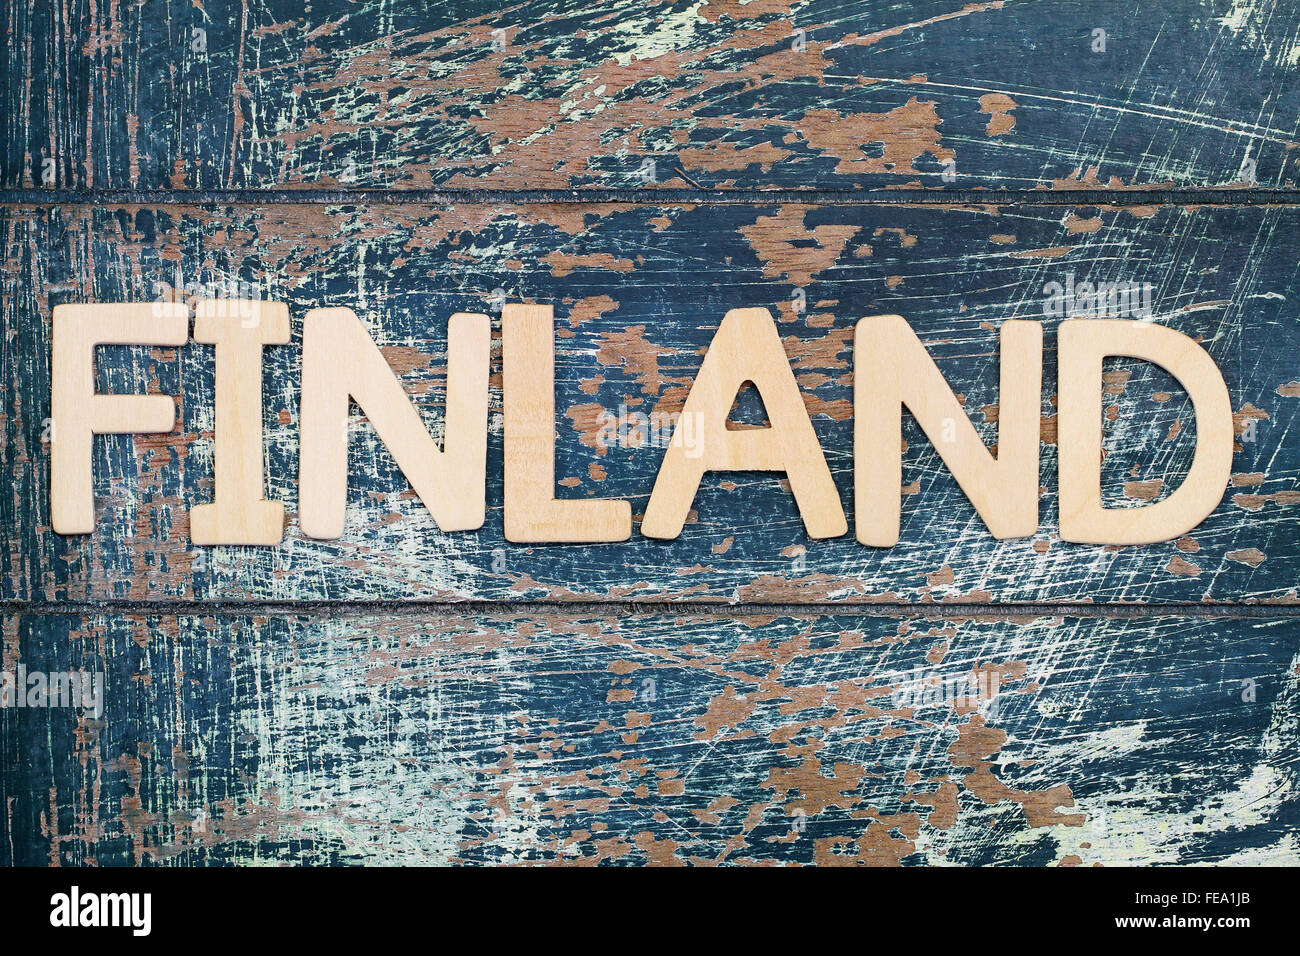 Finland written with wooden letters on rustic surface Stock Photo